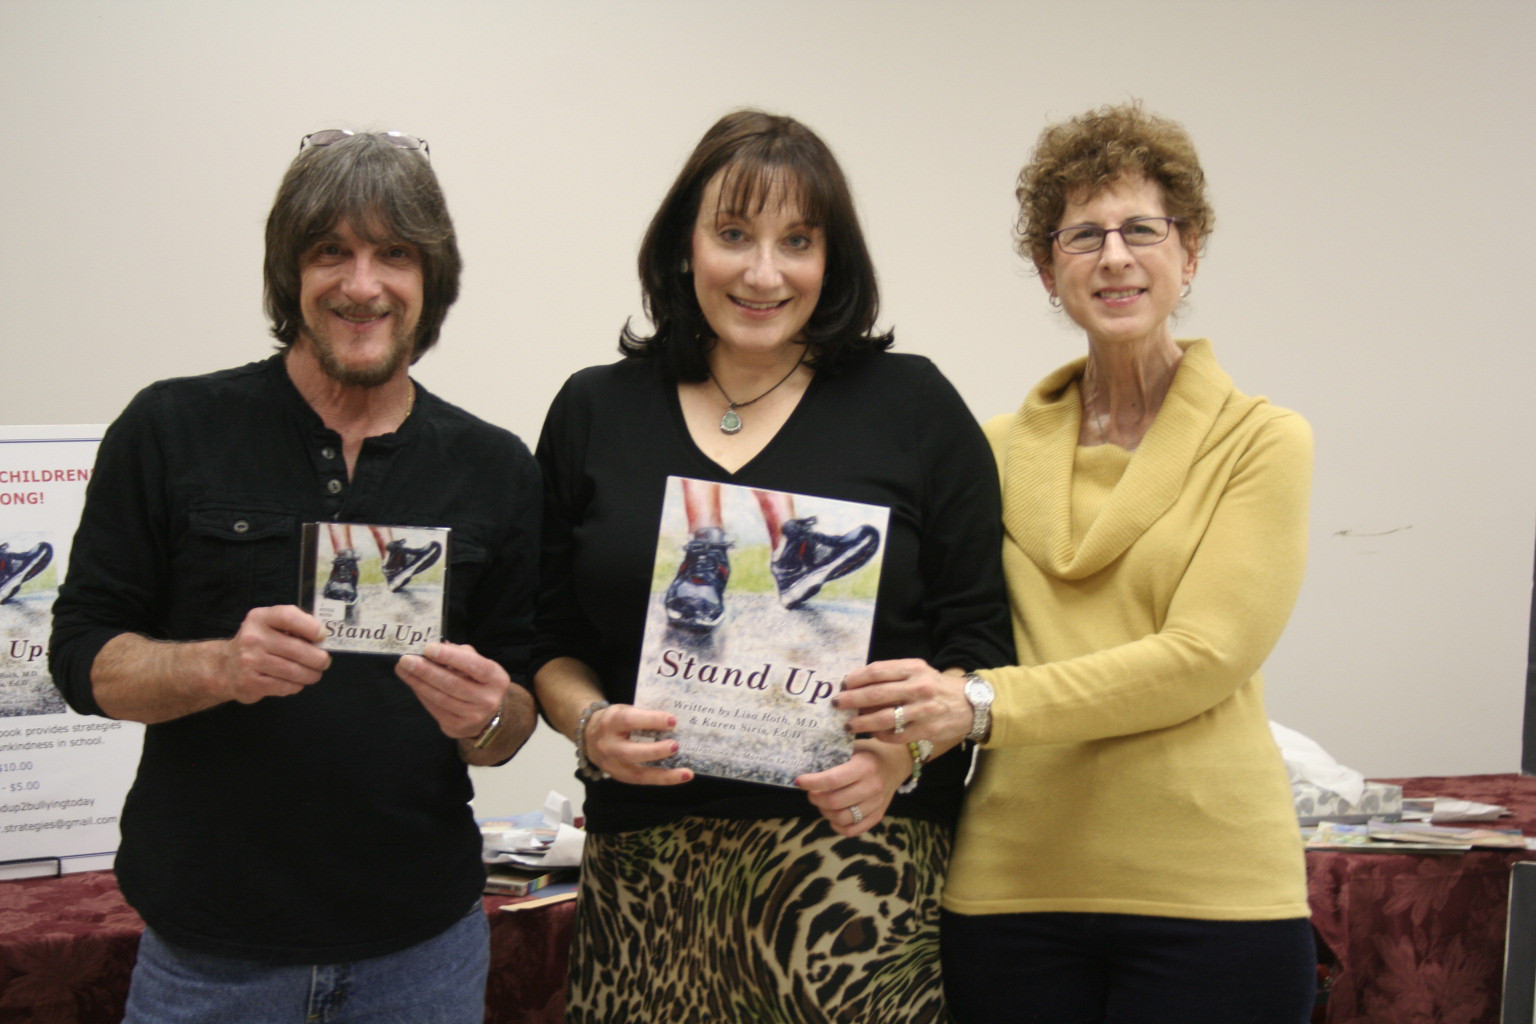 Lisa Roth, center, held a book signing at the East Rockaway Library for “Stand Up!” She was joined by musician Paul Lanzetta, left, of East Rockaway Music, who wrote the accompanying song, and the book’s illustrator, art teacher Marsha Letvin, at right.